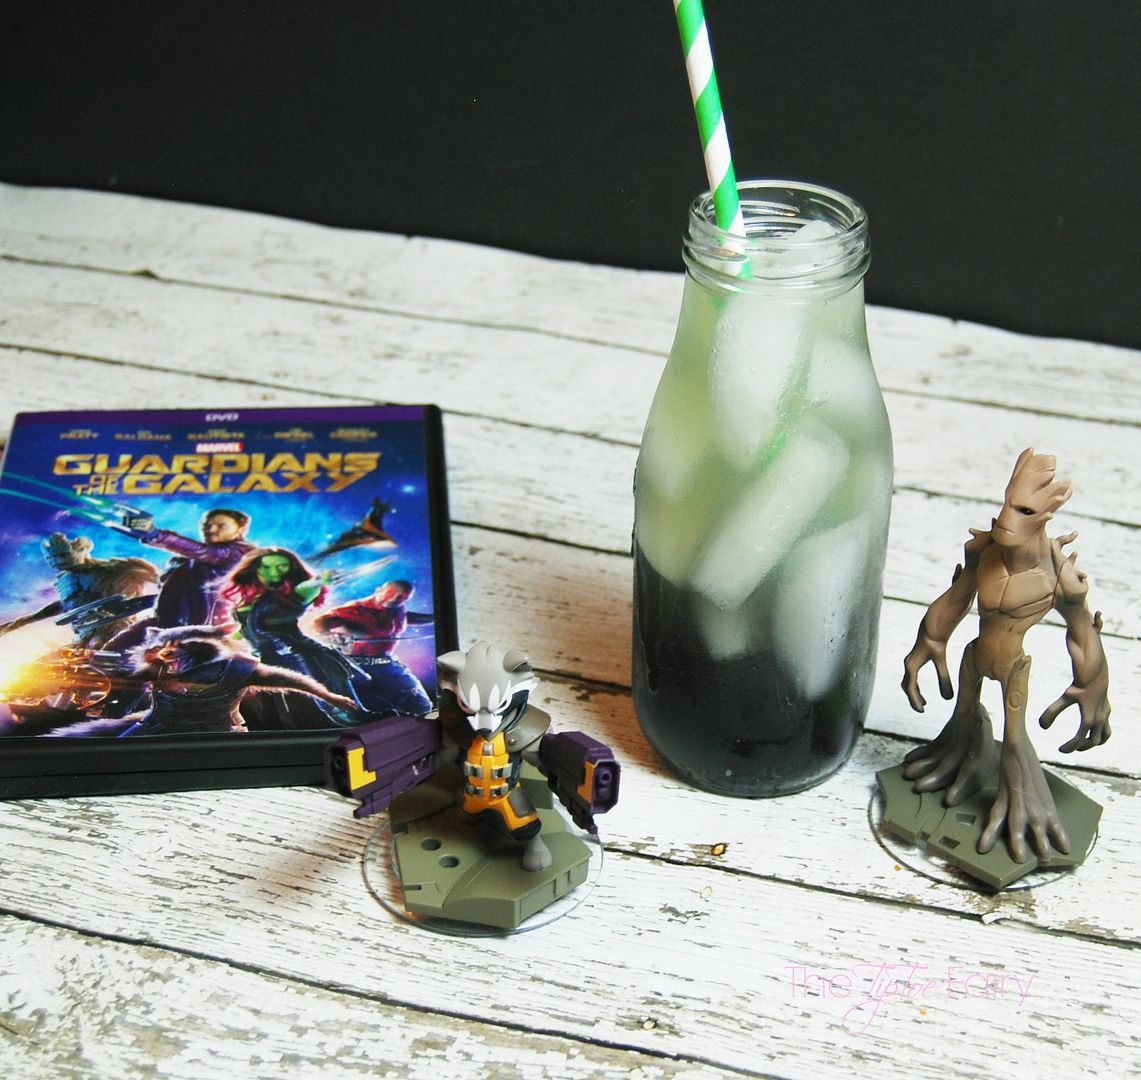 Guardians of the Galaxy Theme Family Movie Night with Groot grilled turkey and cheese sandwiches and layered Gamora drinks | THe TipToe Fairy #OwntheGalaxy #ad